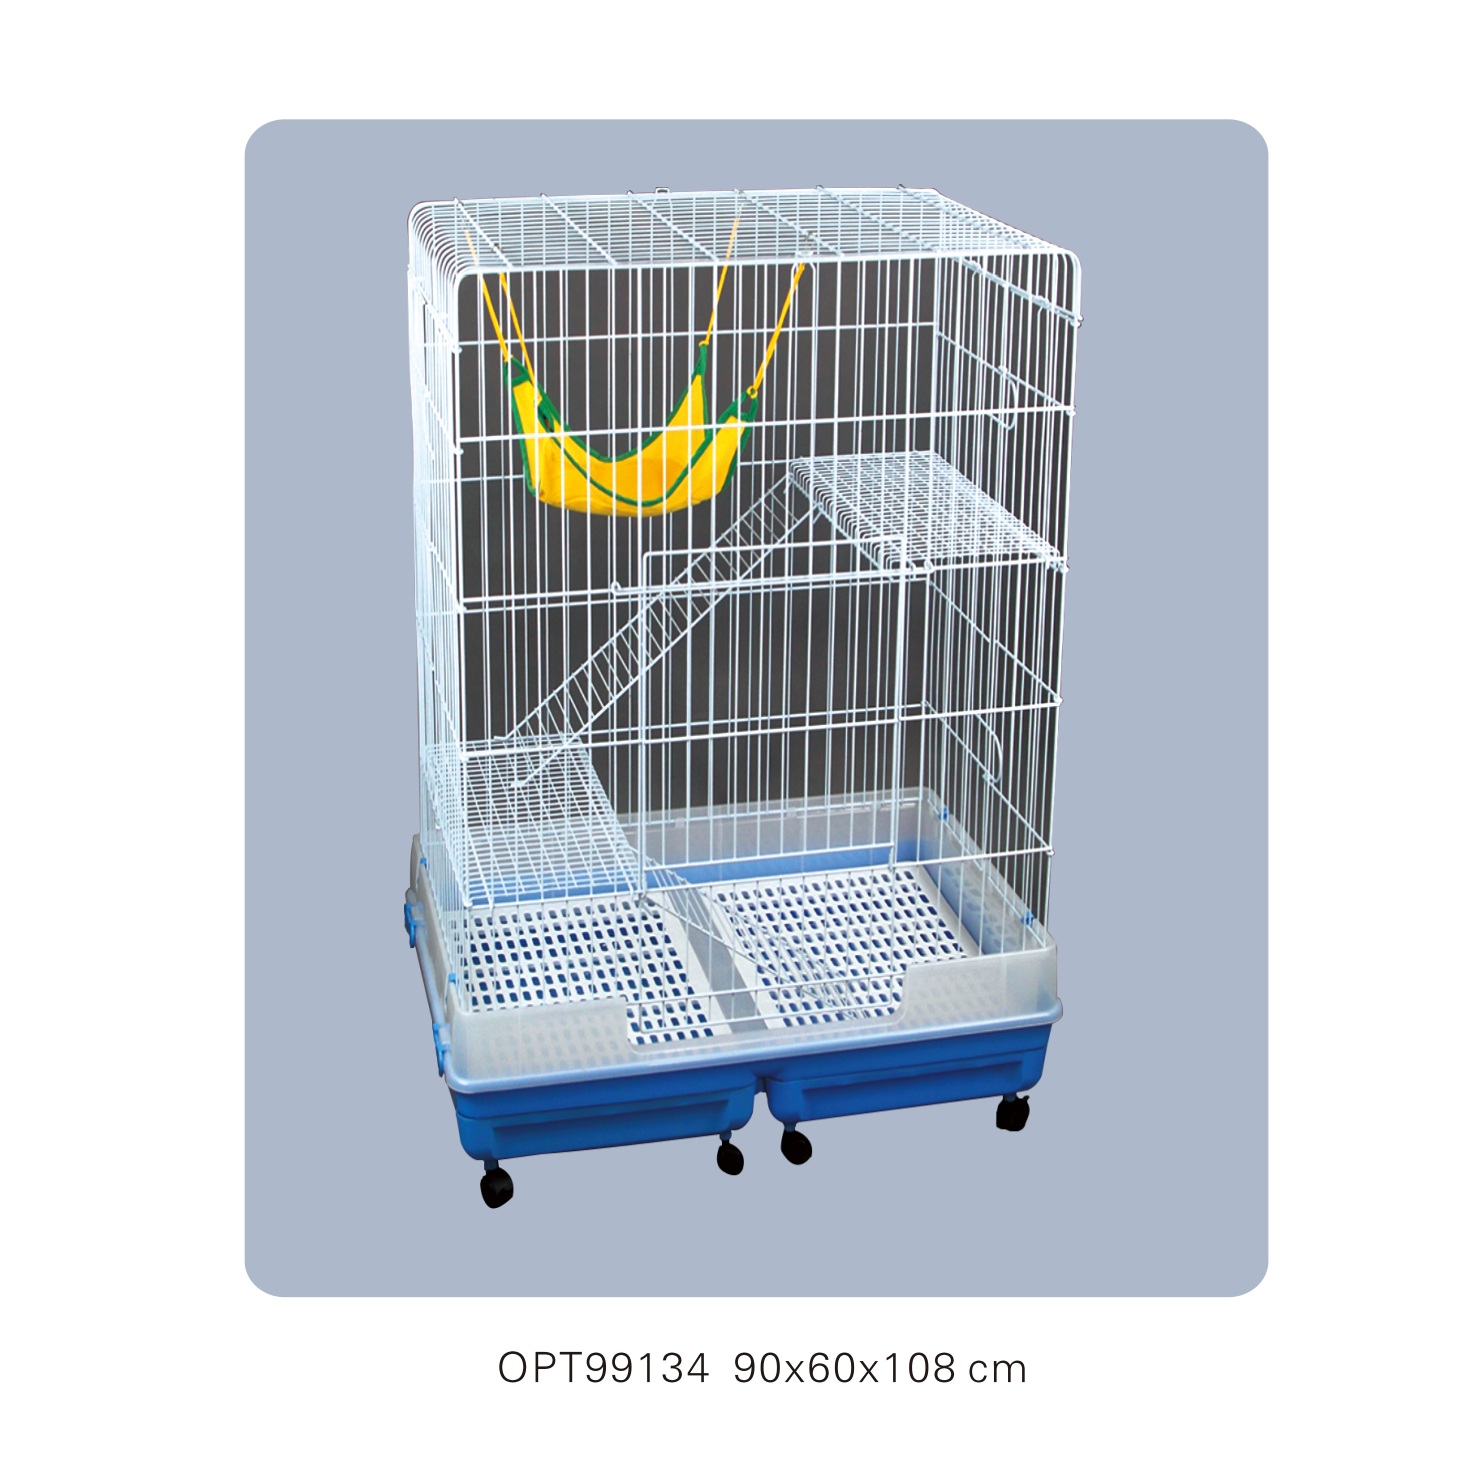 OPT99134 90x60x108cm small animal cages